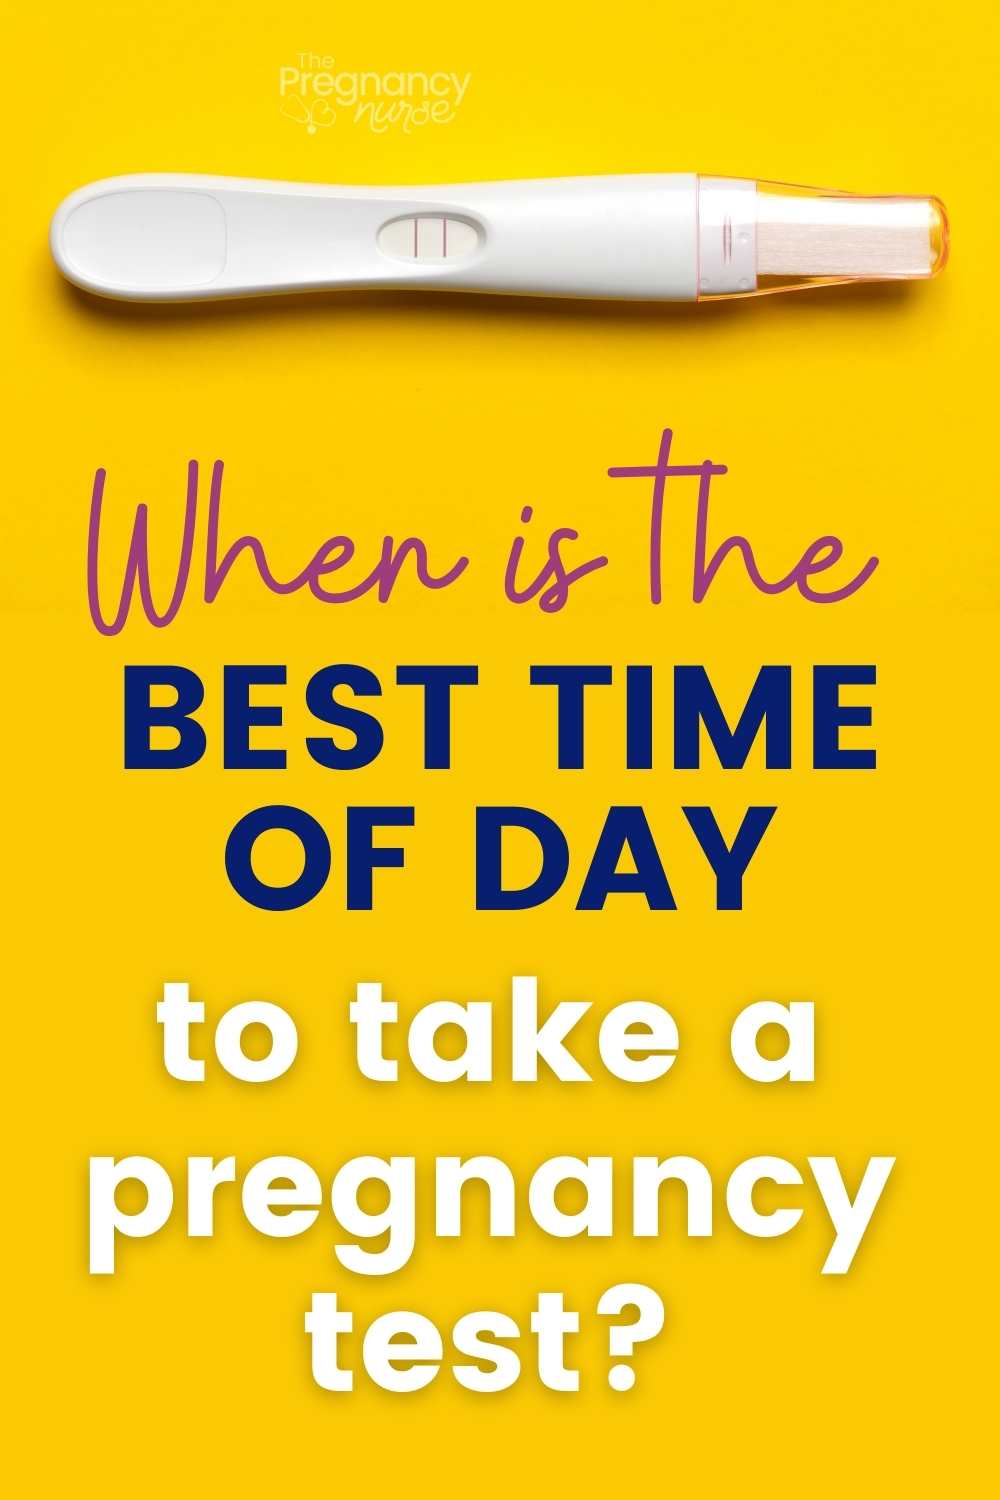 There's no one "right" time to take a pregnancy test. However, doing so at the right time can give you more accurate results. Here are some tips on when to take a pregnancy test for the best results!